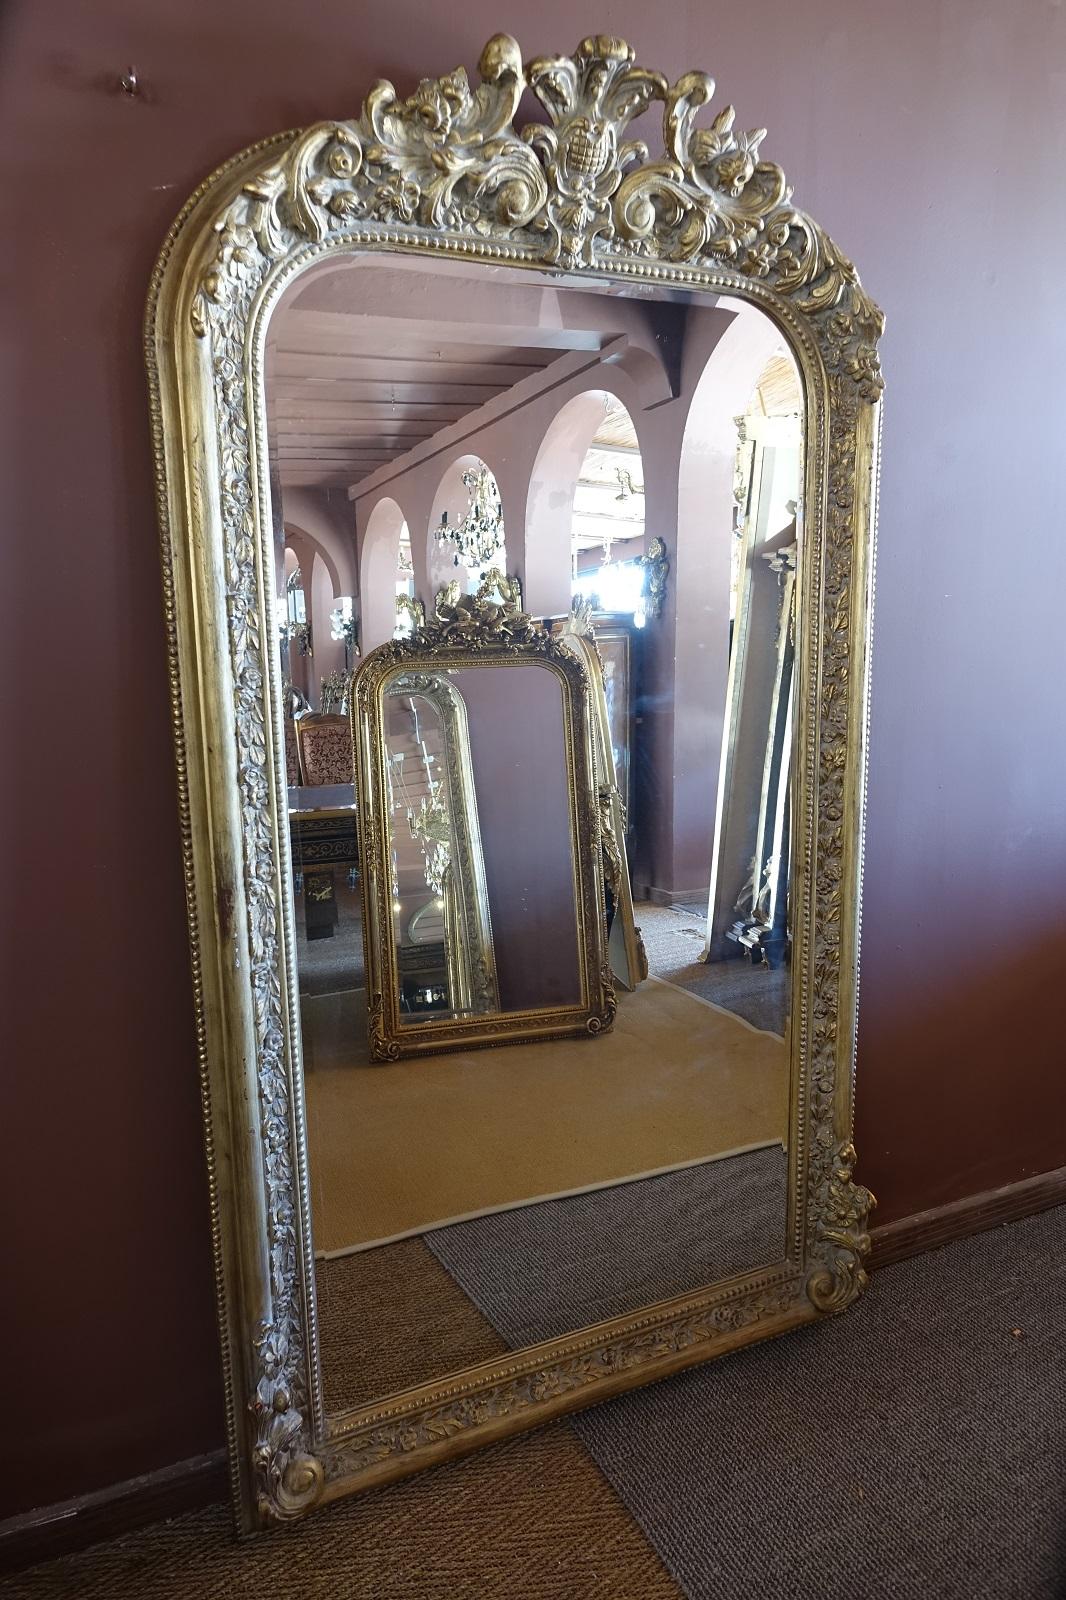 A large beveled mirror, in perfect condition and ornate gilding. Has a flat footprint and therefore can be hung elevated on a wall or flush with the floor. The subtle gilding means the piece is at home in a modern or an antique setting.